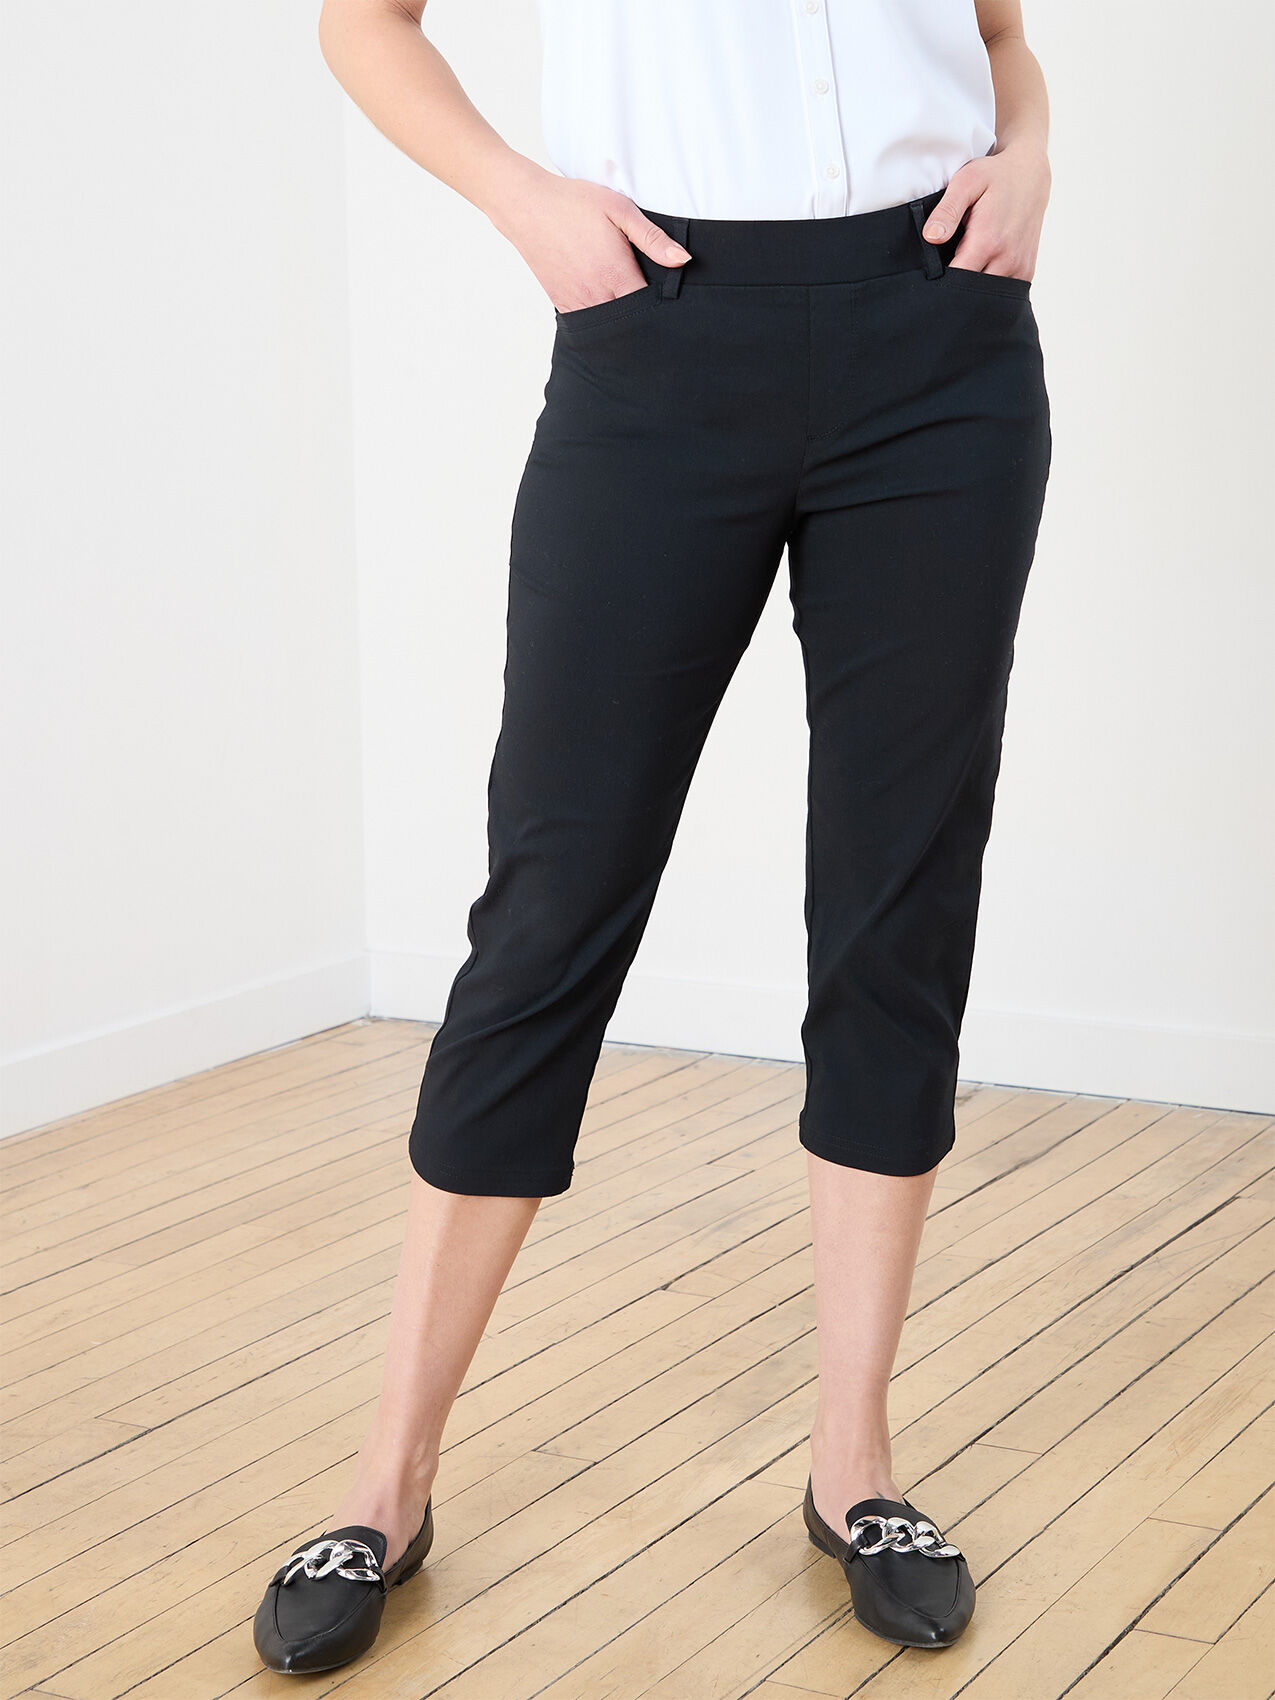 Women's Petite Bottoms at Cleo Canada